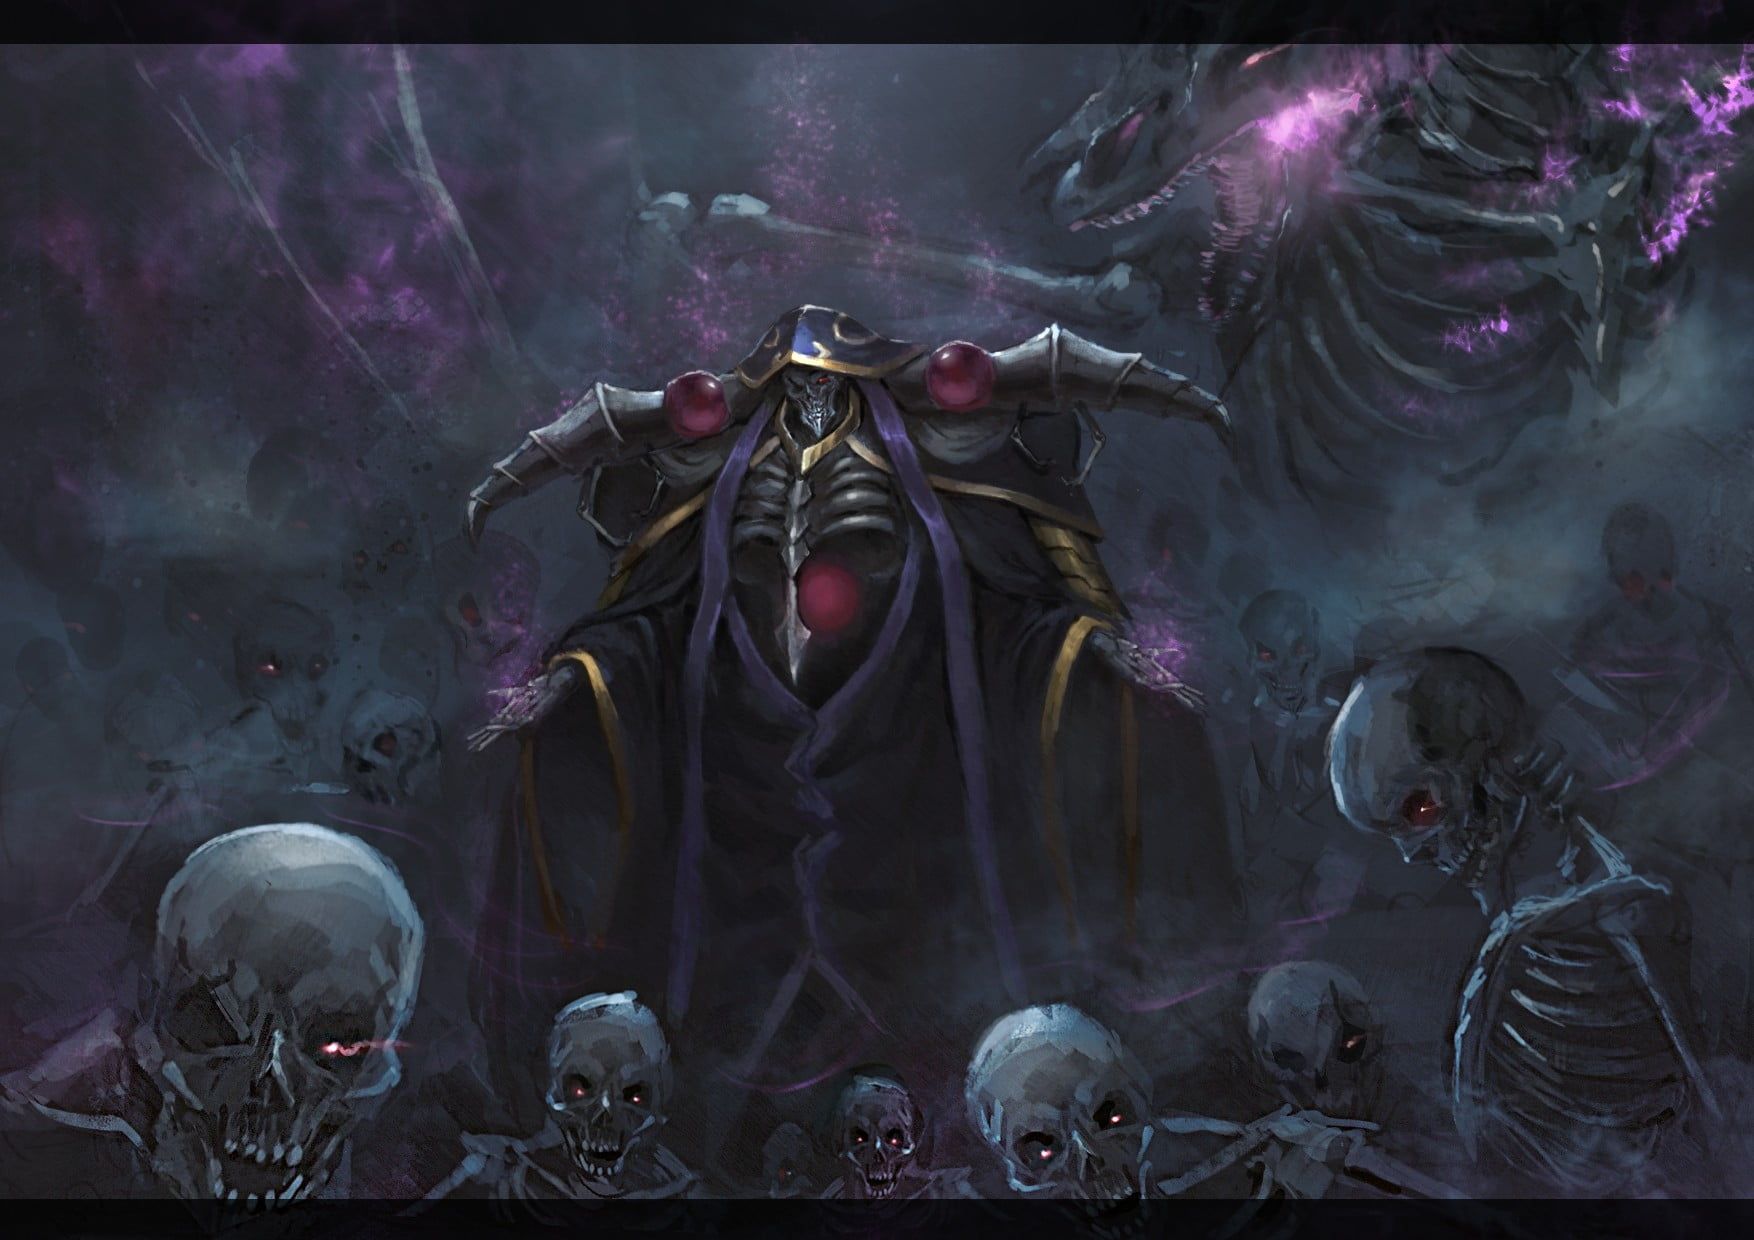 Skeleton digital wallpaper, Ainz Ooal Gown, Overlord (anime), red